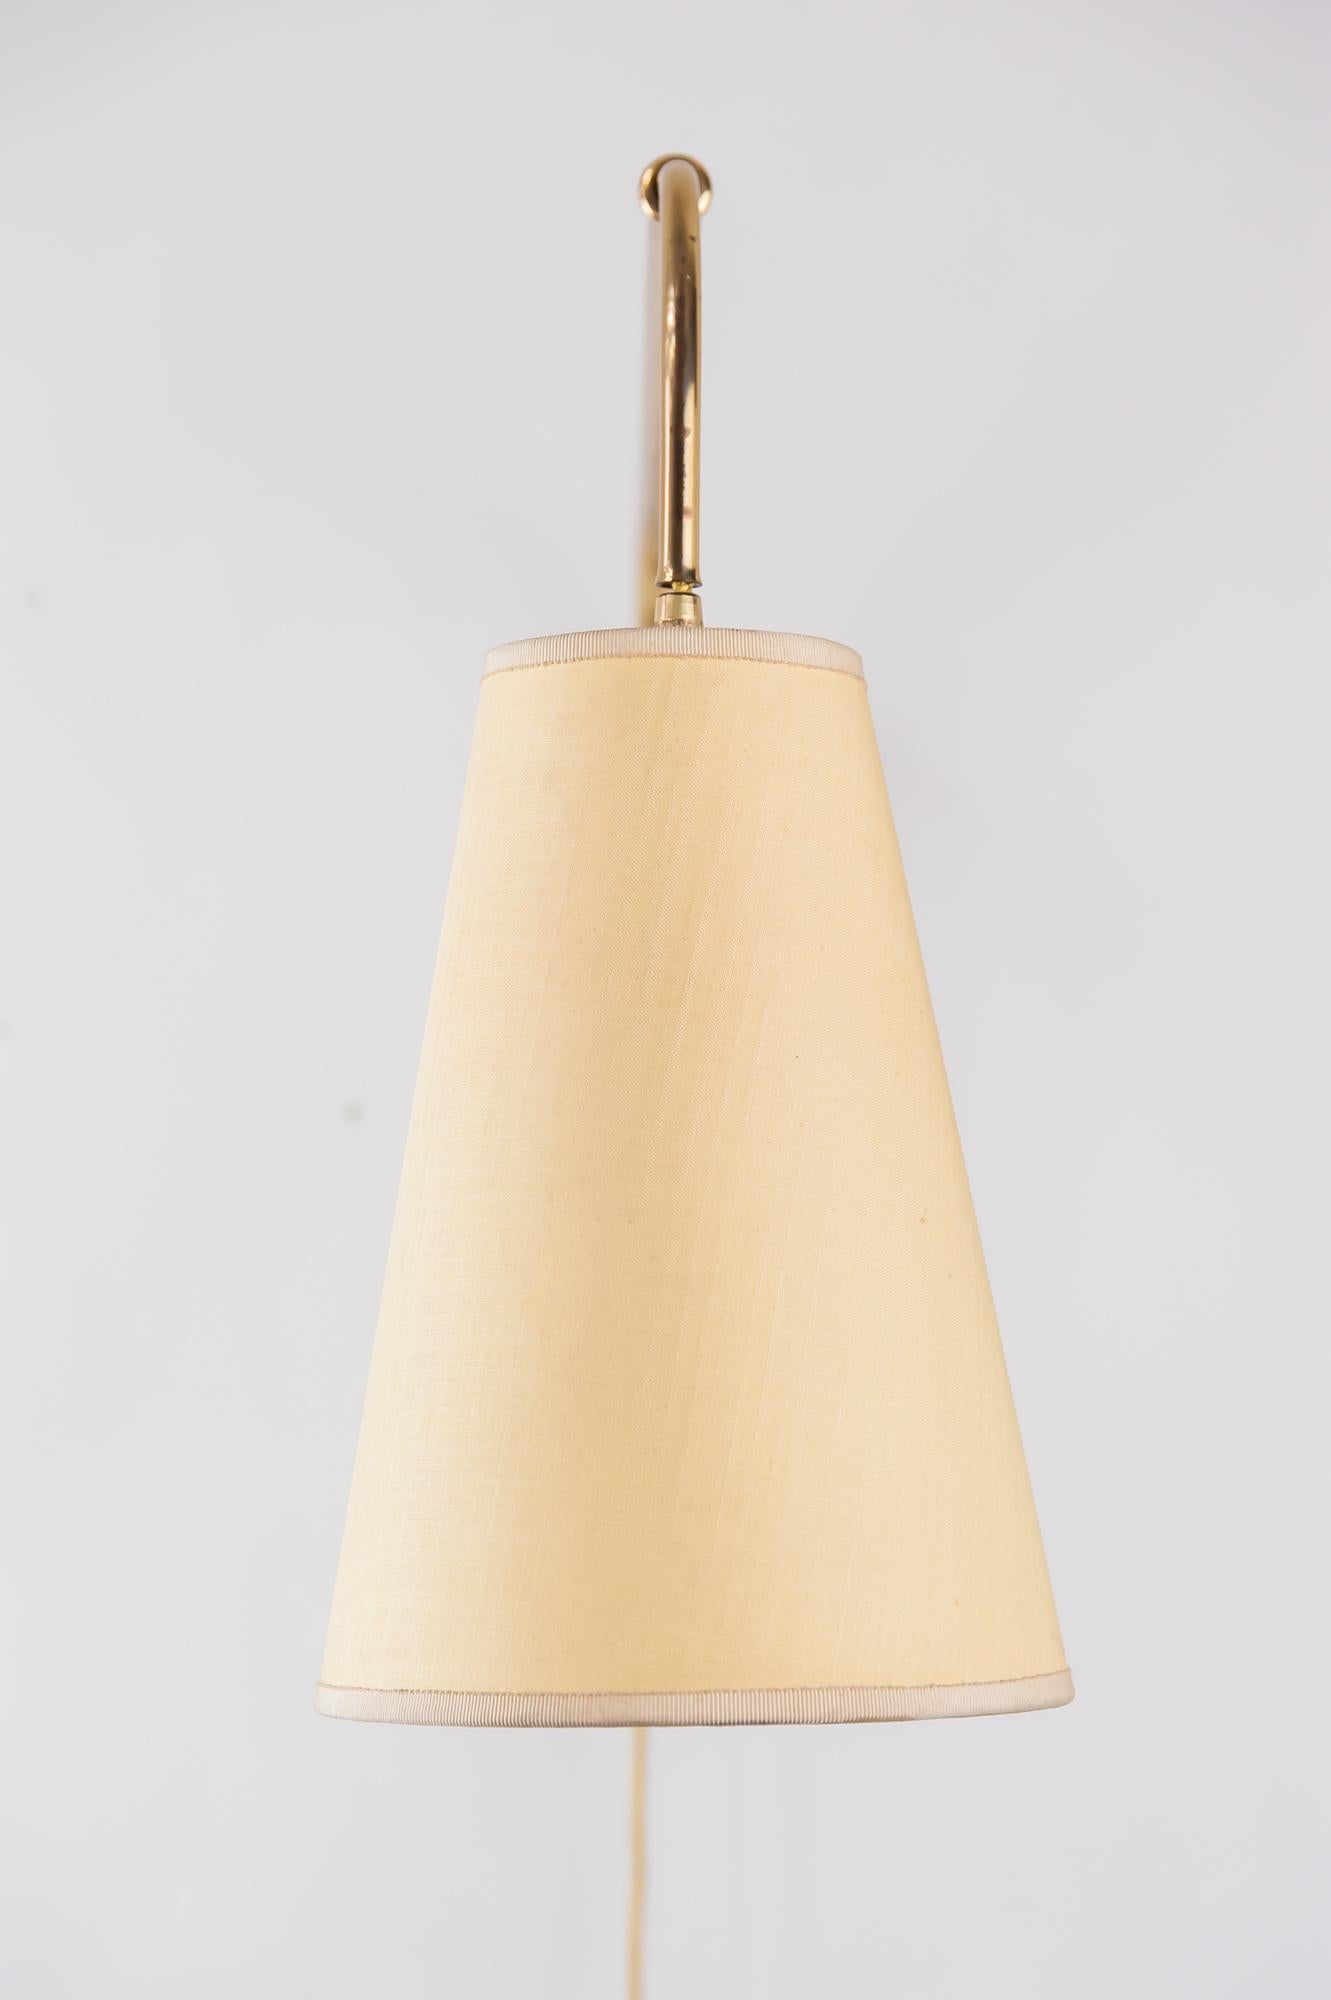 Austrian Art Deco Swiveling and Extendable Wall Lamp, circa 1950s